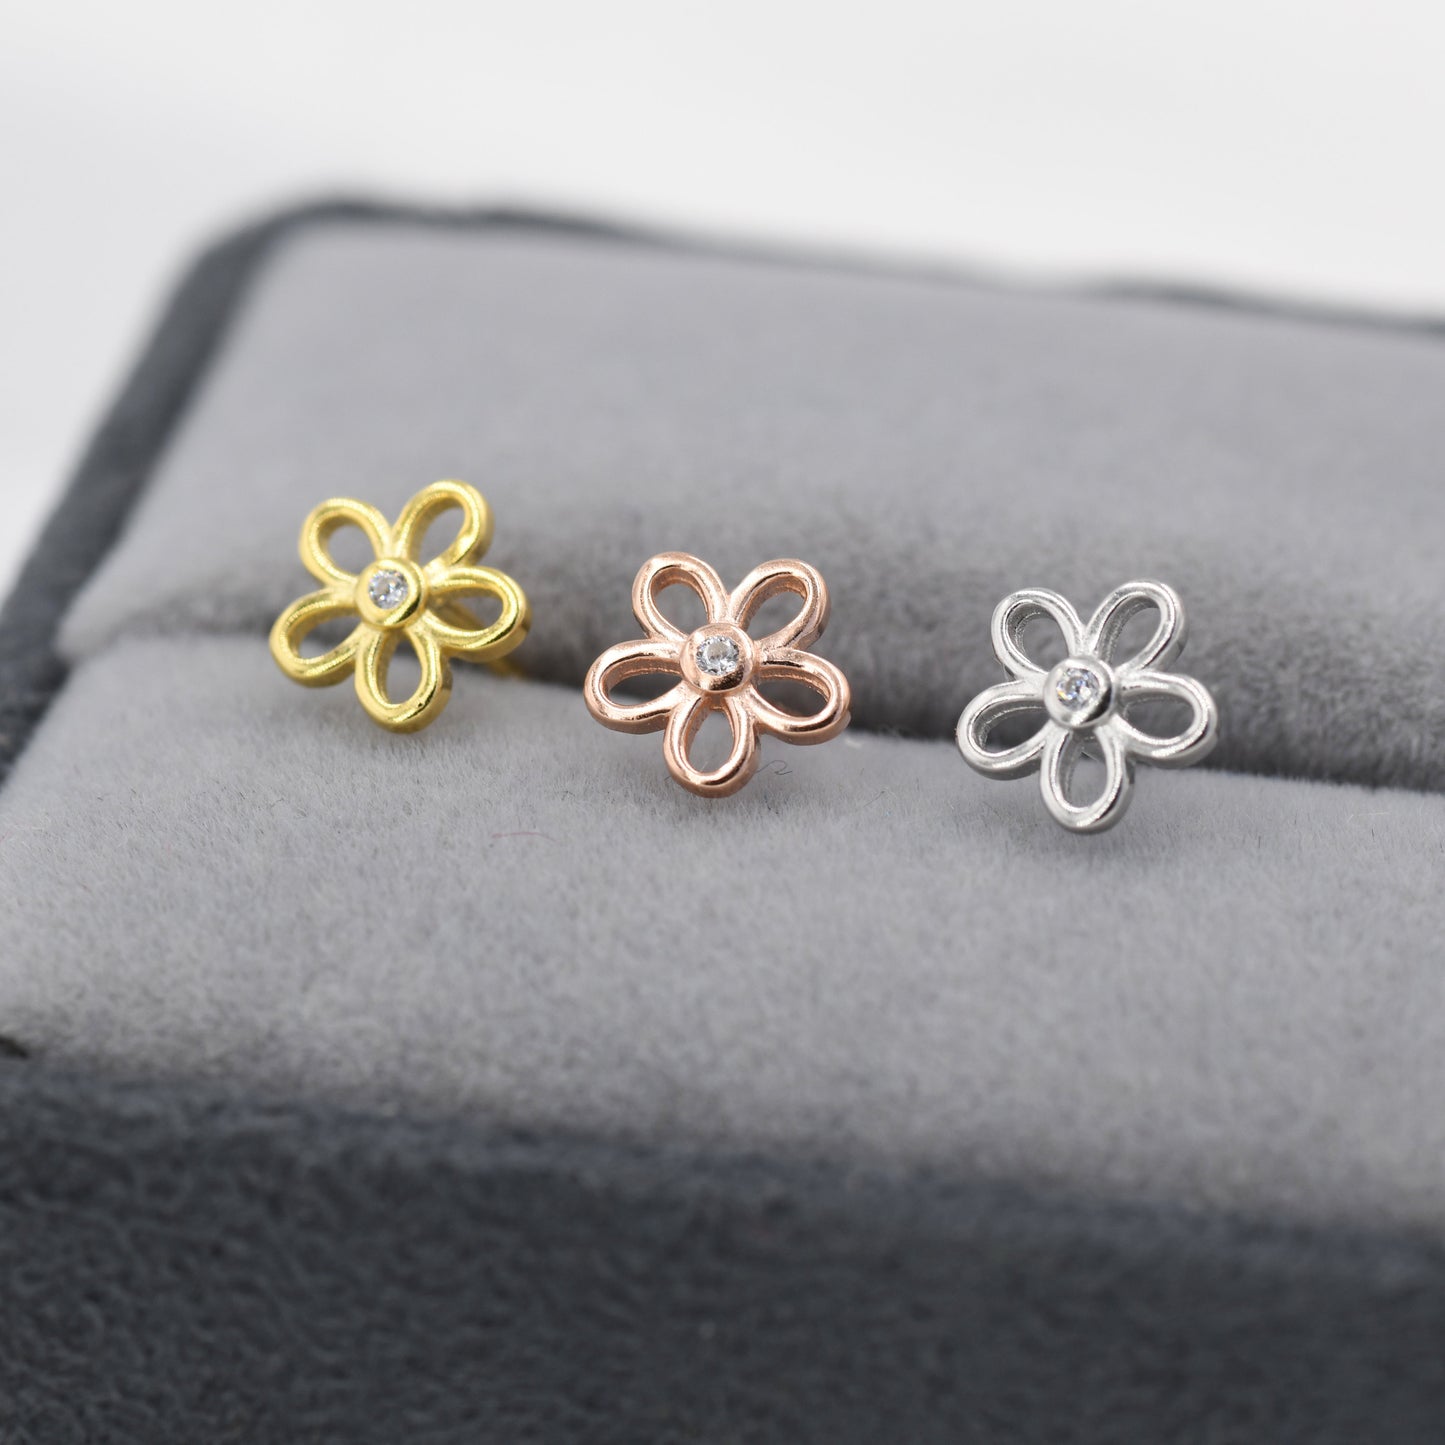 Tiny Forget-me-not Flower Stud Earrings in Sterling Silver, Silver or Rose Gold, Nature Inspired Flower Earrings, Botanical Earrings